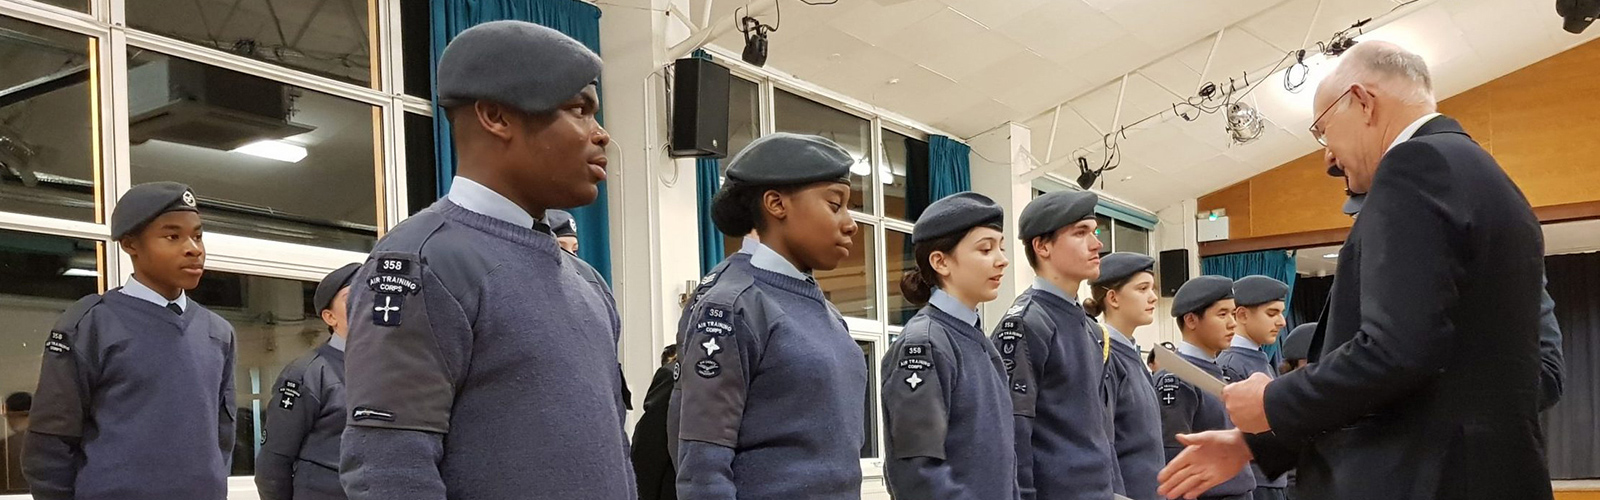 Image shows young RAF air cadets (ages 11-14) receiving awards from a senior Company official